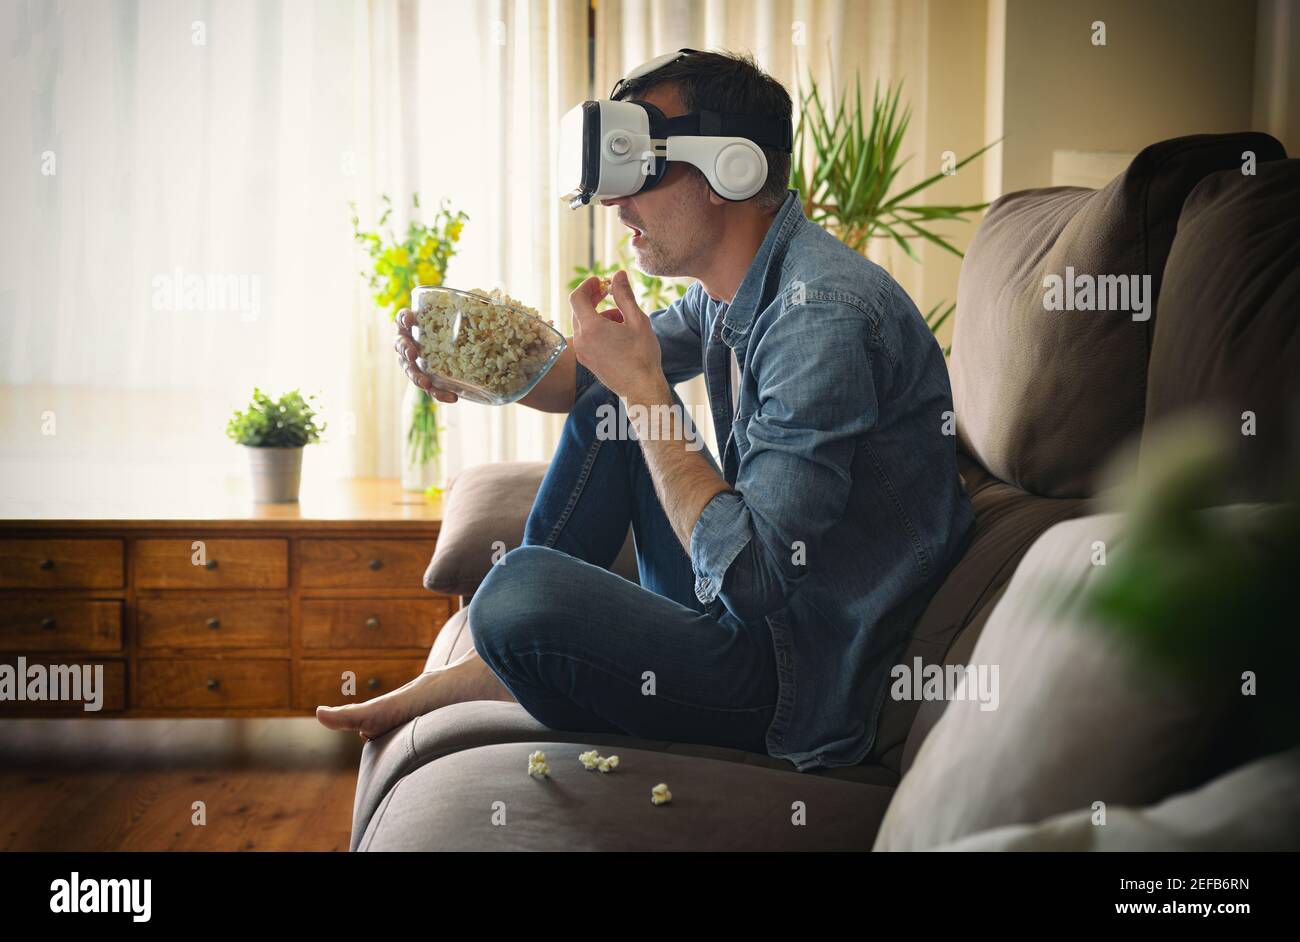 Astonished man watching a movie in virtual reality glasses and eating popcorn sitting on the sofa at home Stock Photo